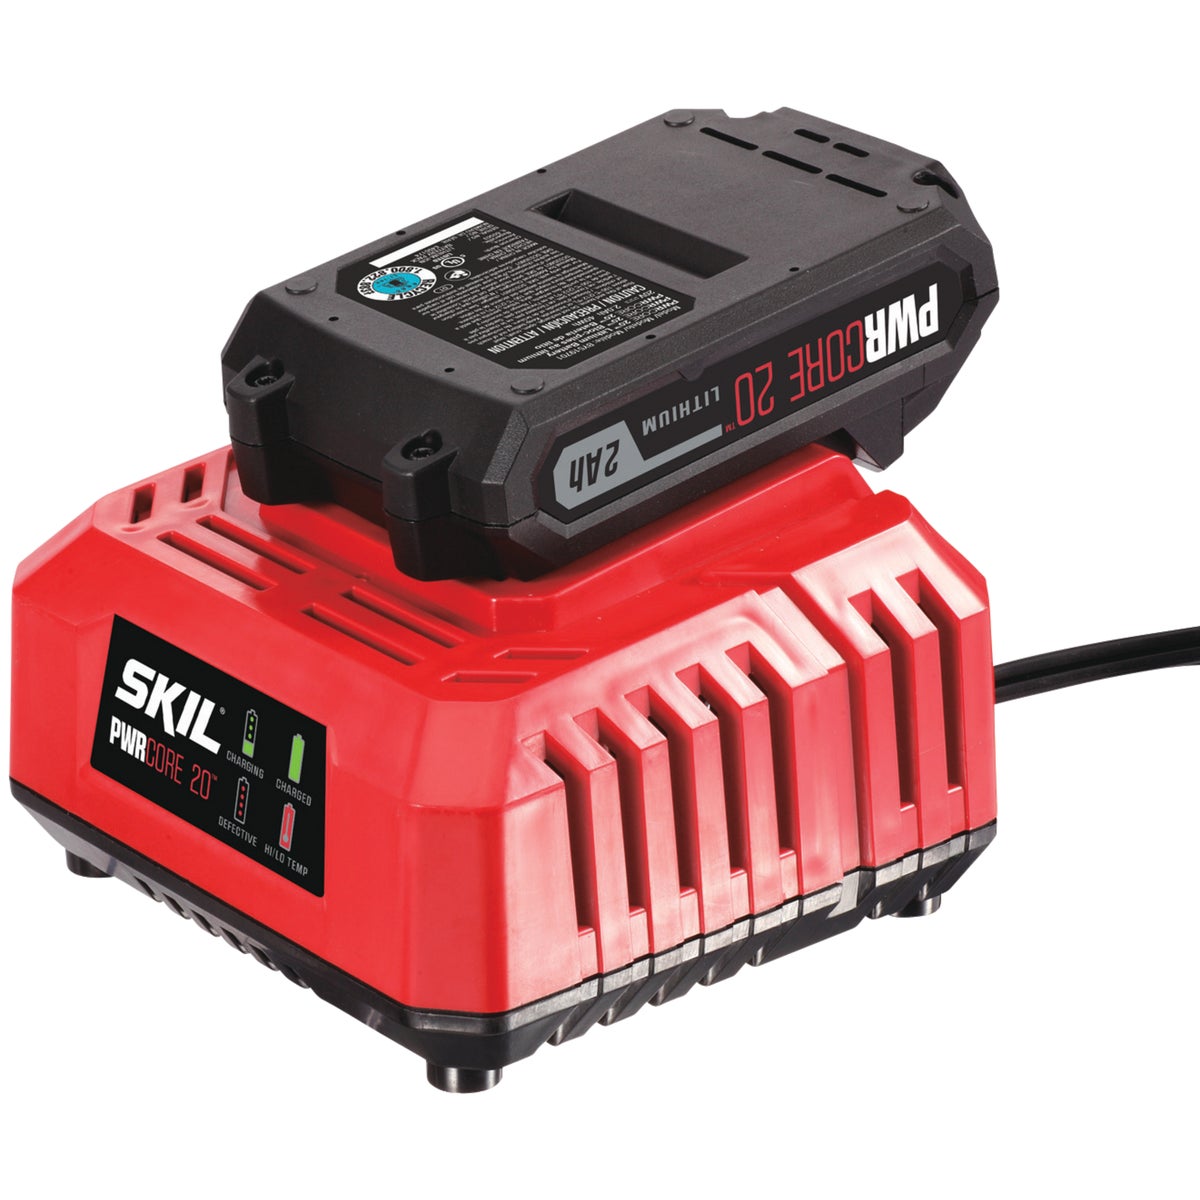 SKIL PWRCore 20 Volt Lithium-Ion Battery Charger